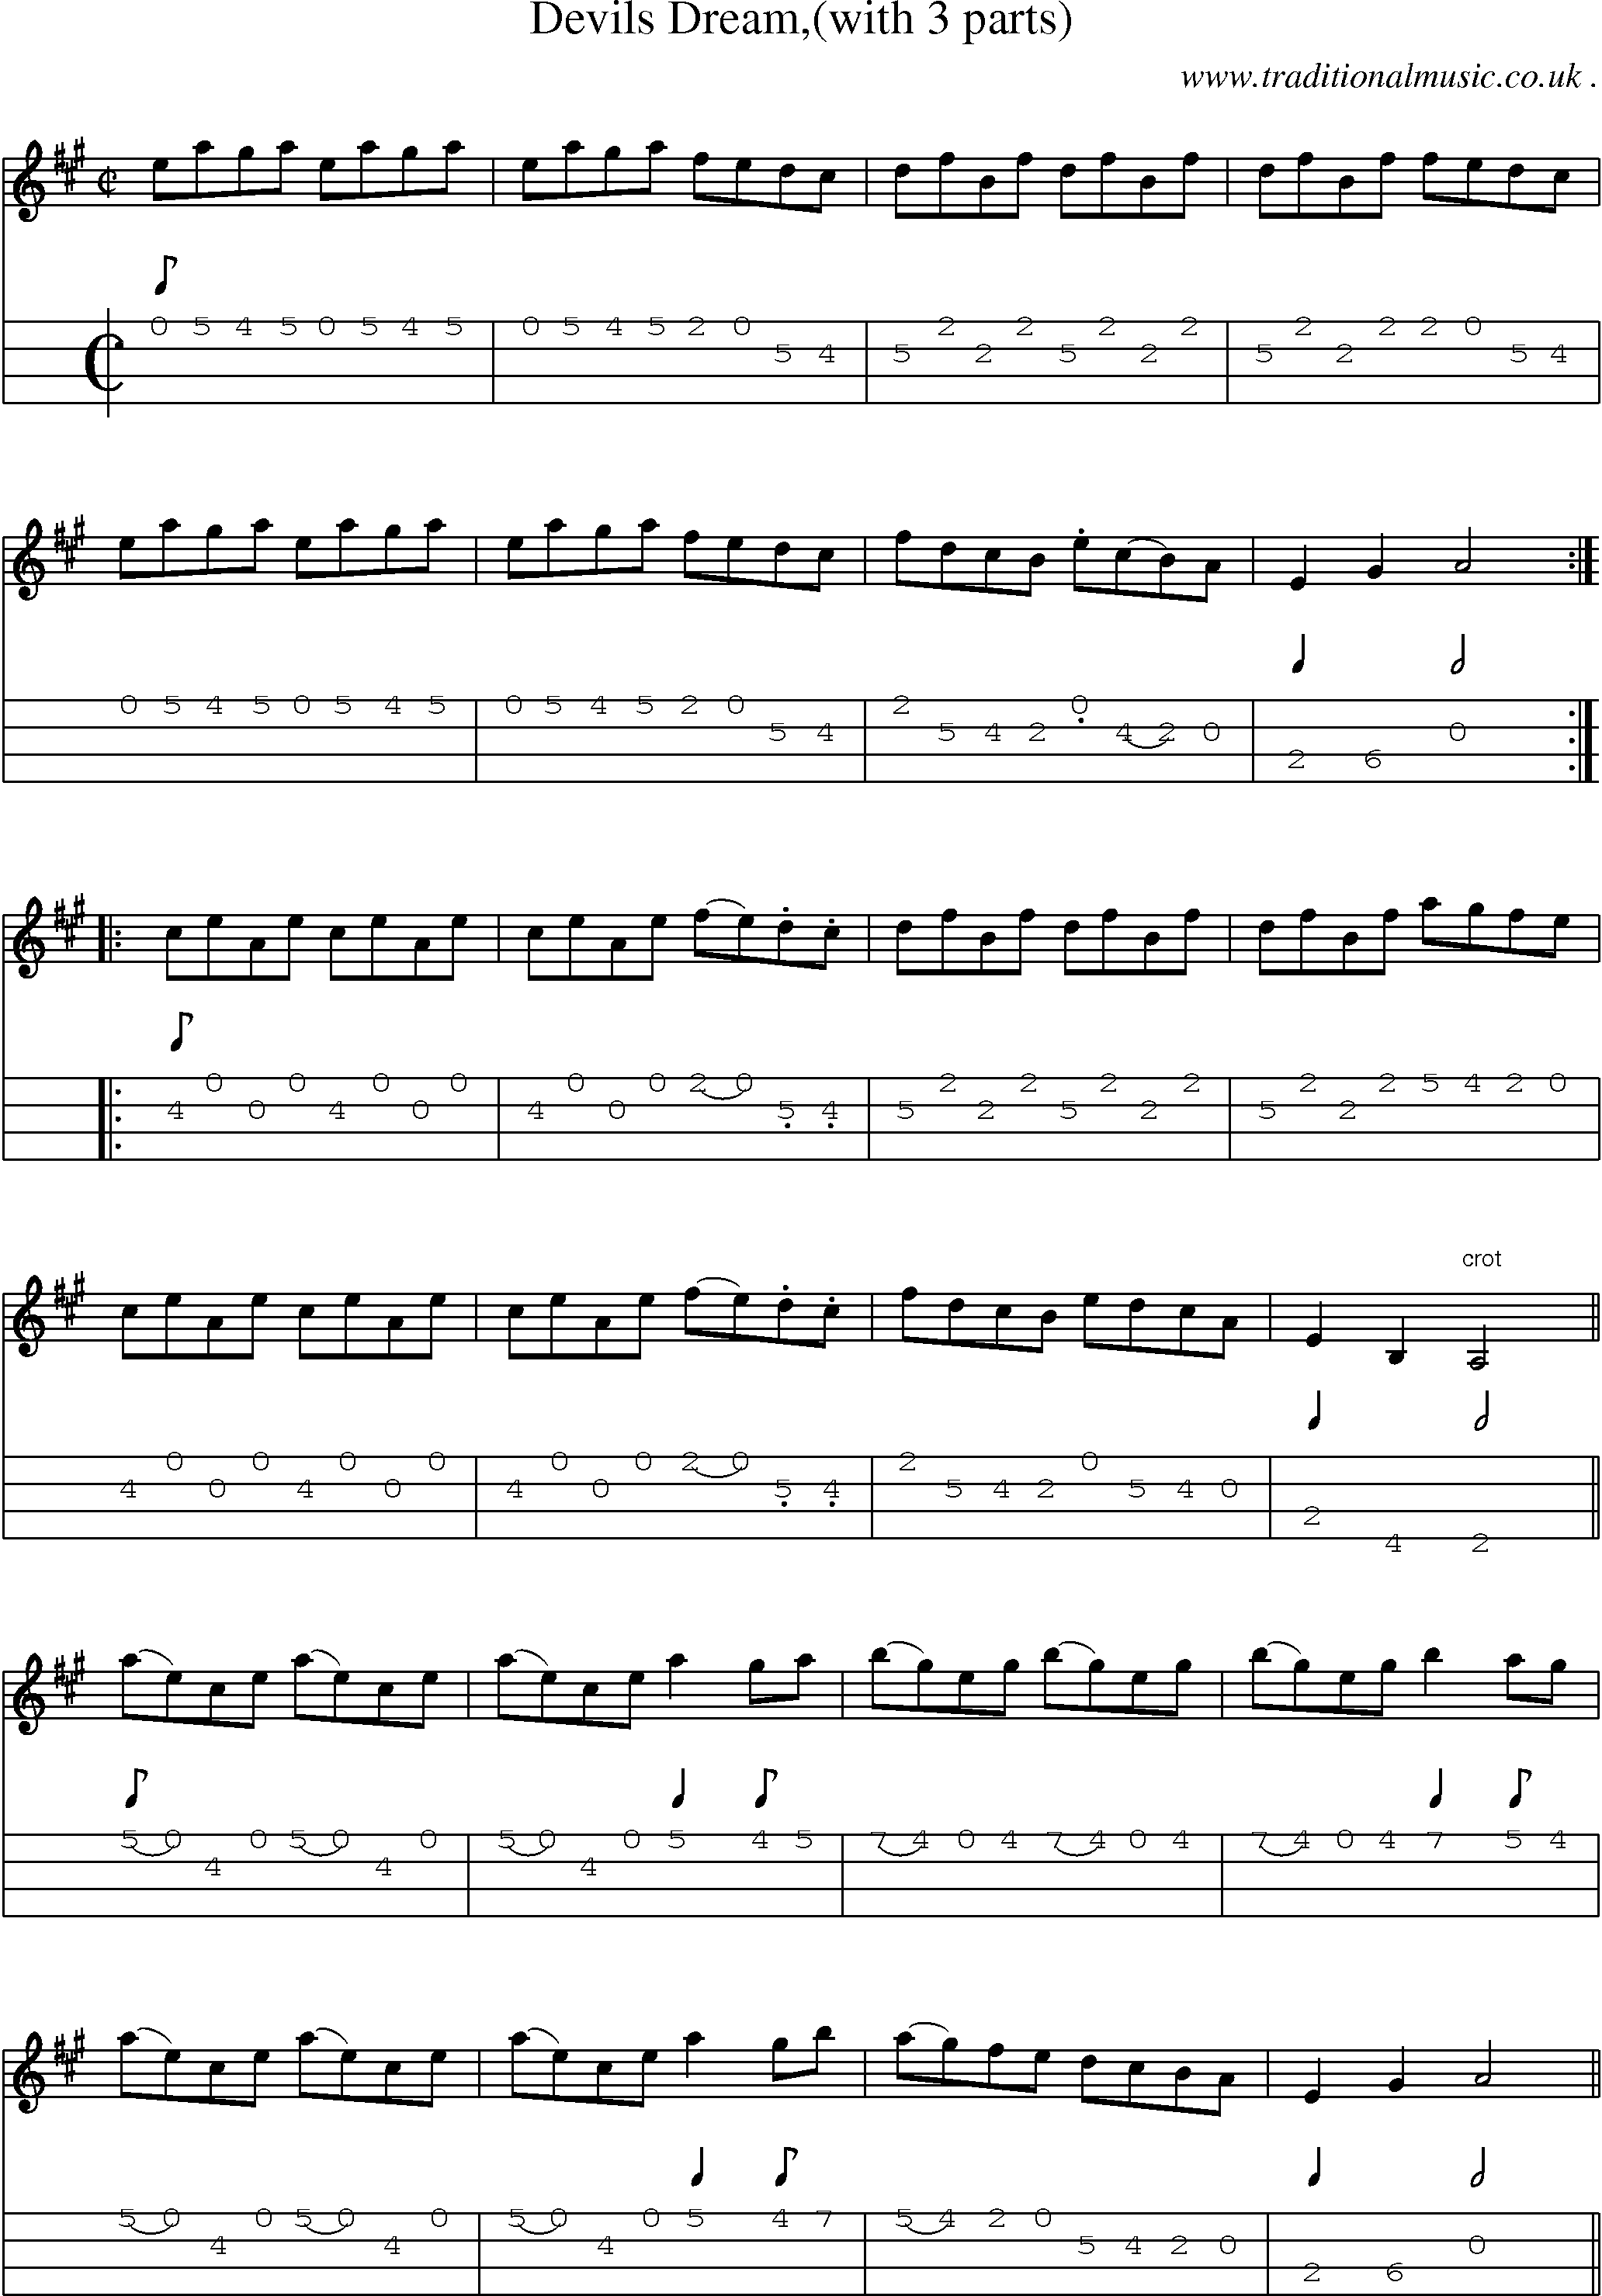 Sheet-Music and Mandolin Tabs for Devils Dream(with 3 Parts)